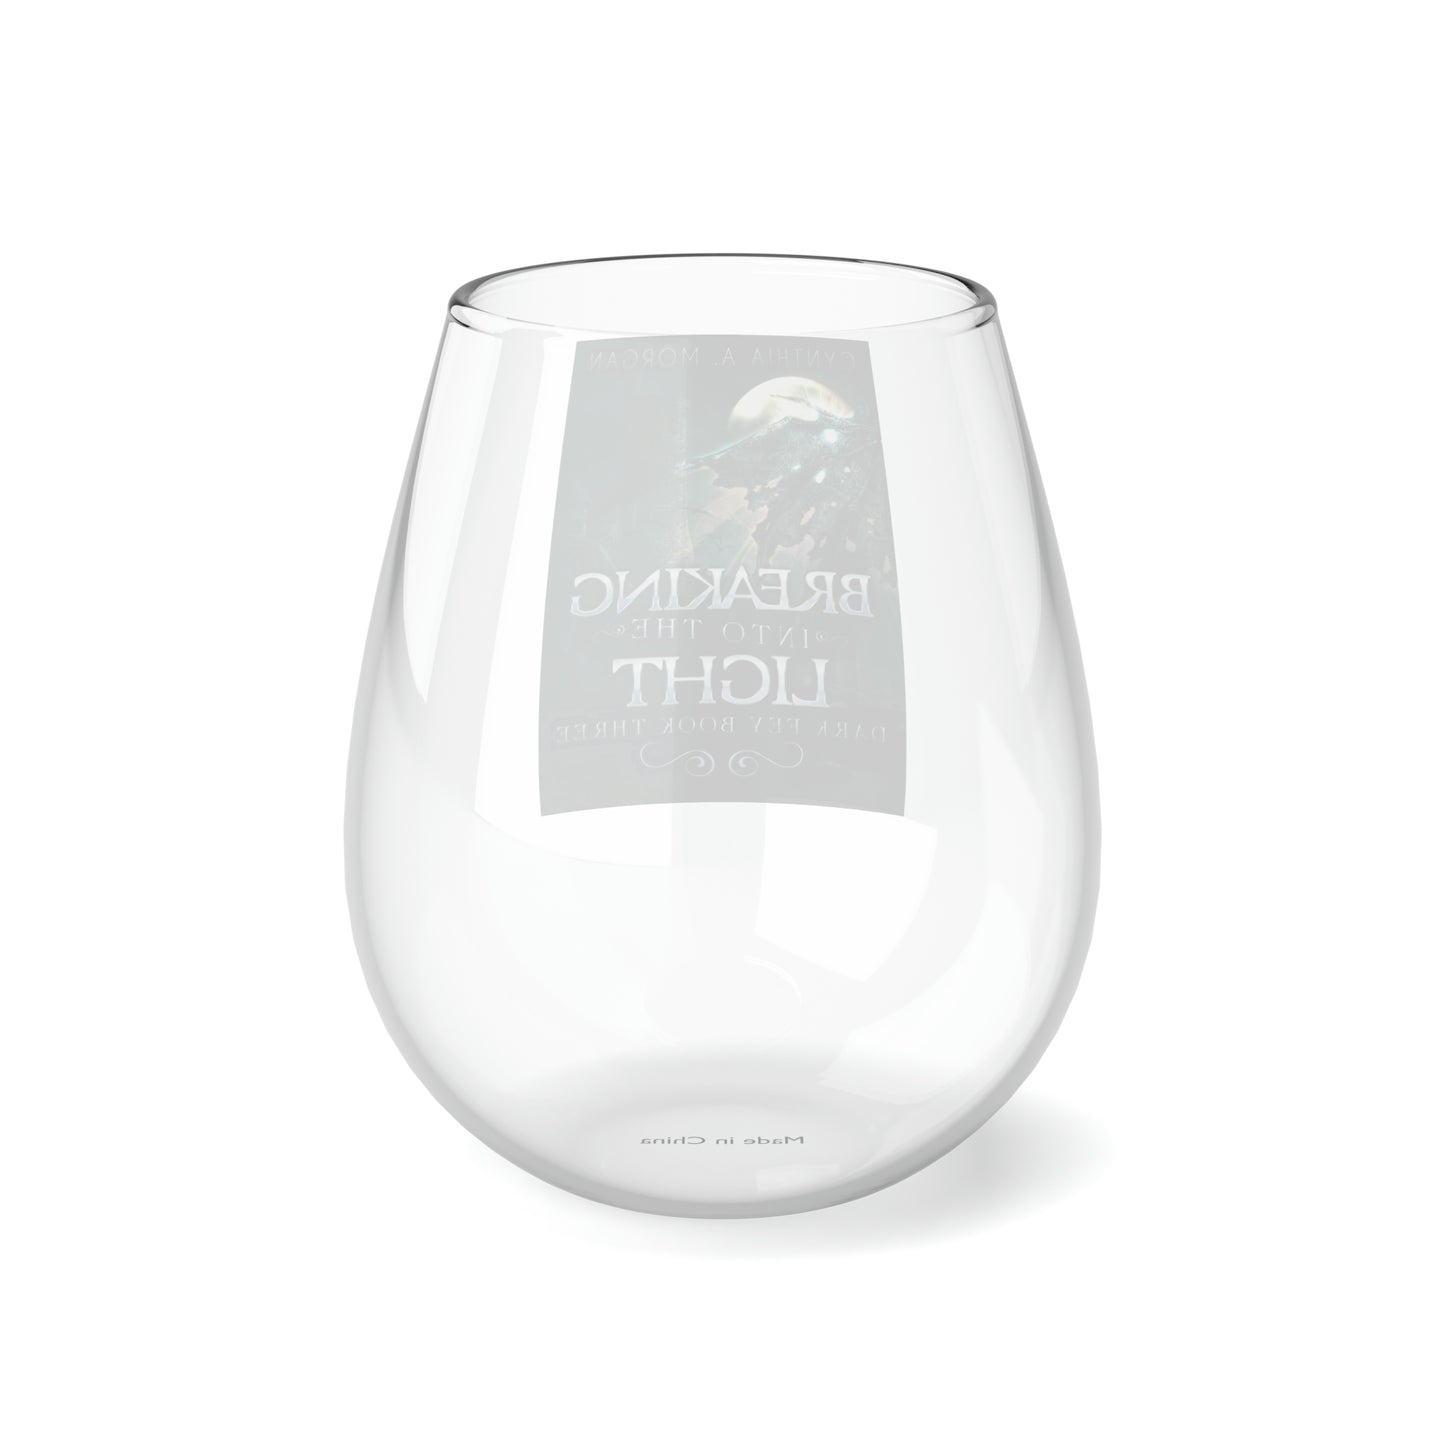 Breaking Into The Light - Stemless Wine Glass, 11.75oz